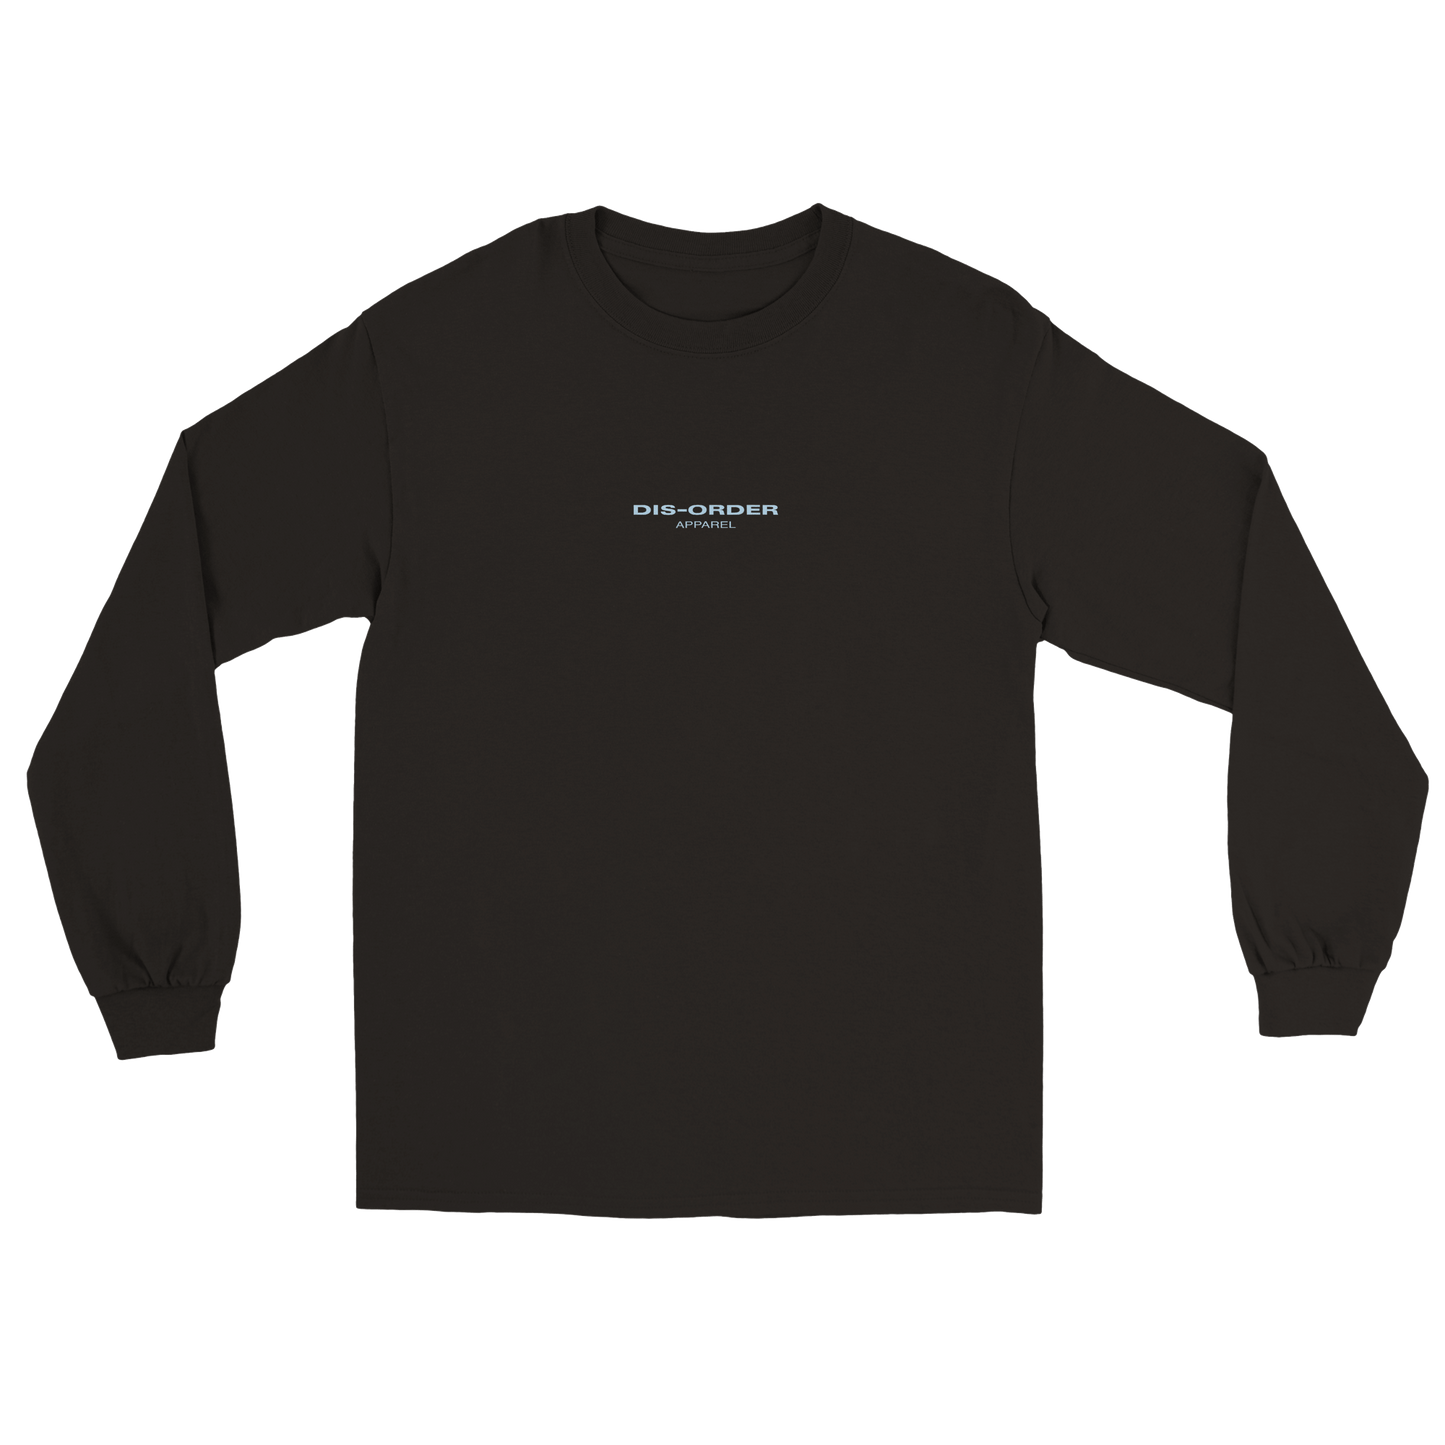 Real Growth Takes Time - Long sleeve shirt